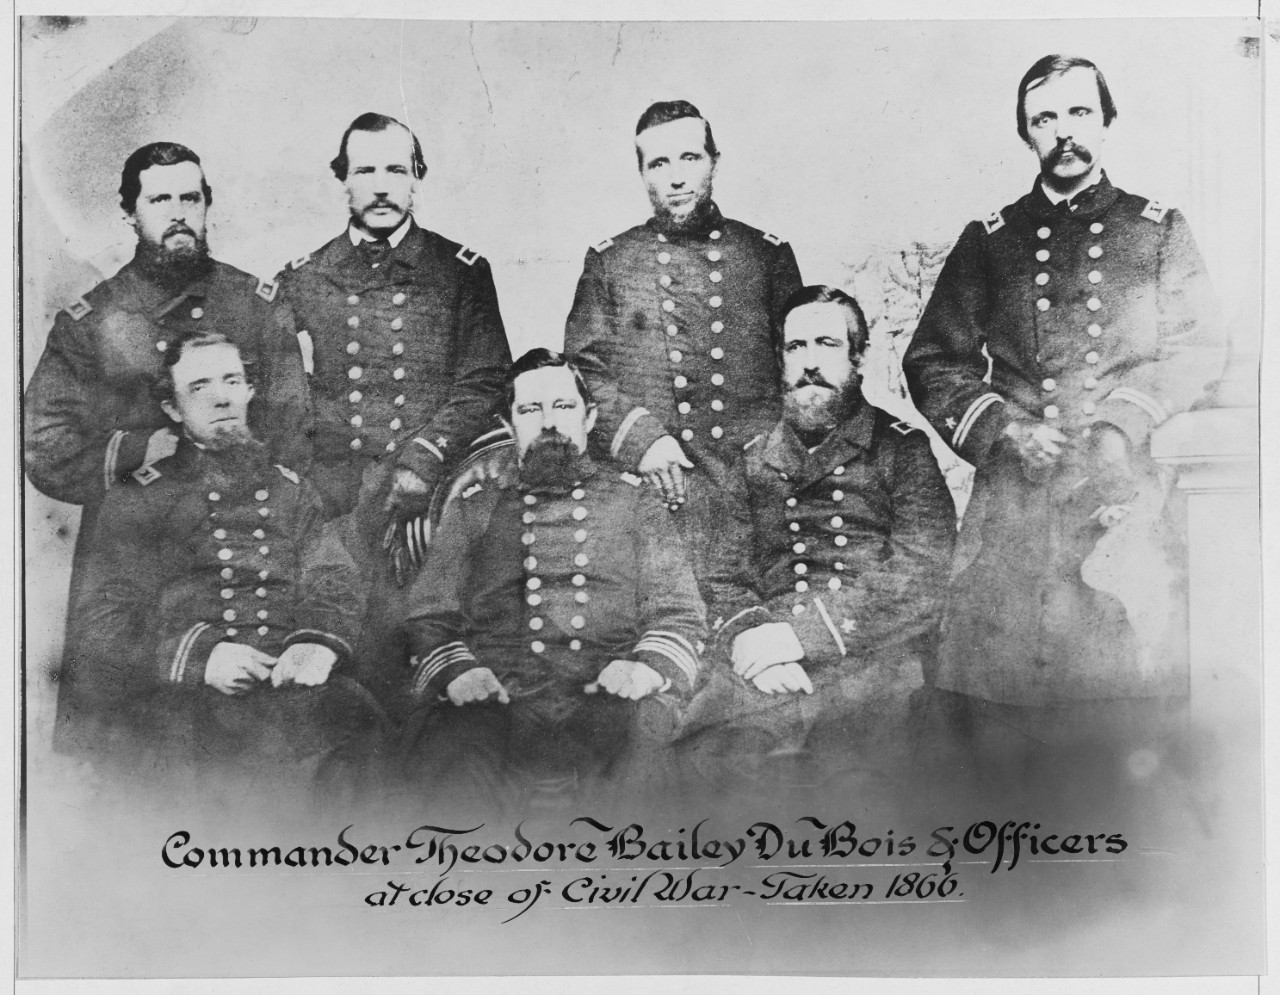 Commander Theodore Bailey Du'Bois & Officers at close of Civil War taken 1866